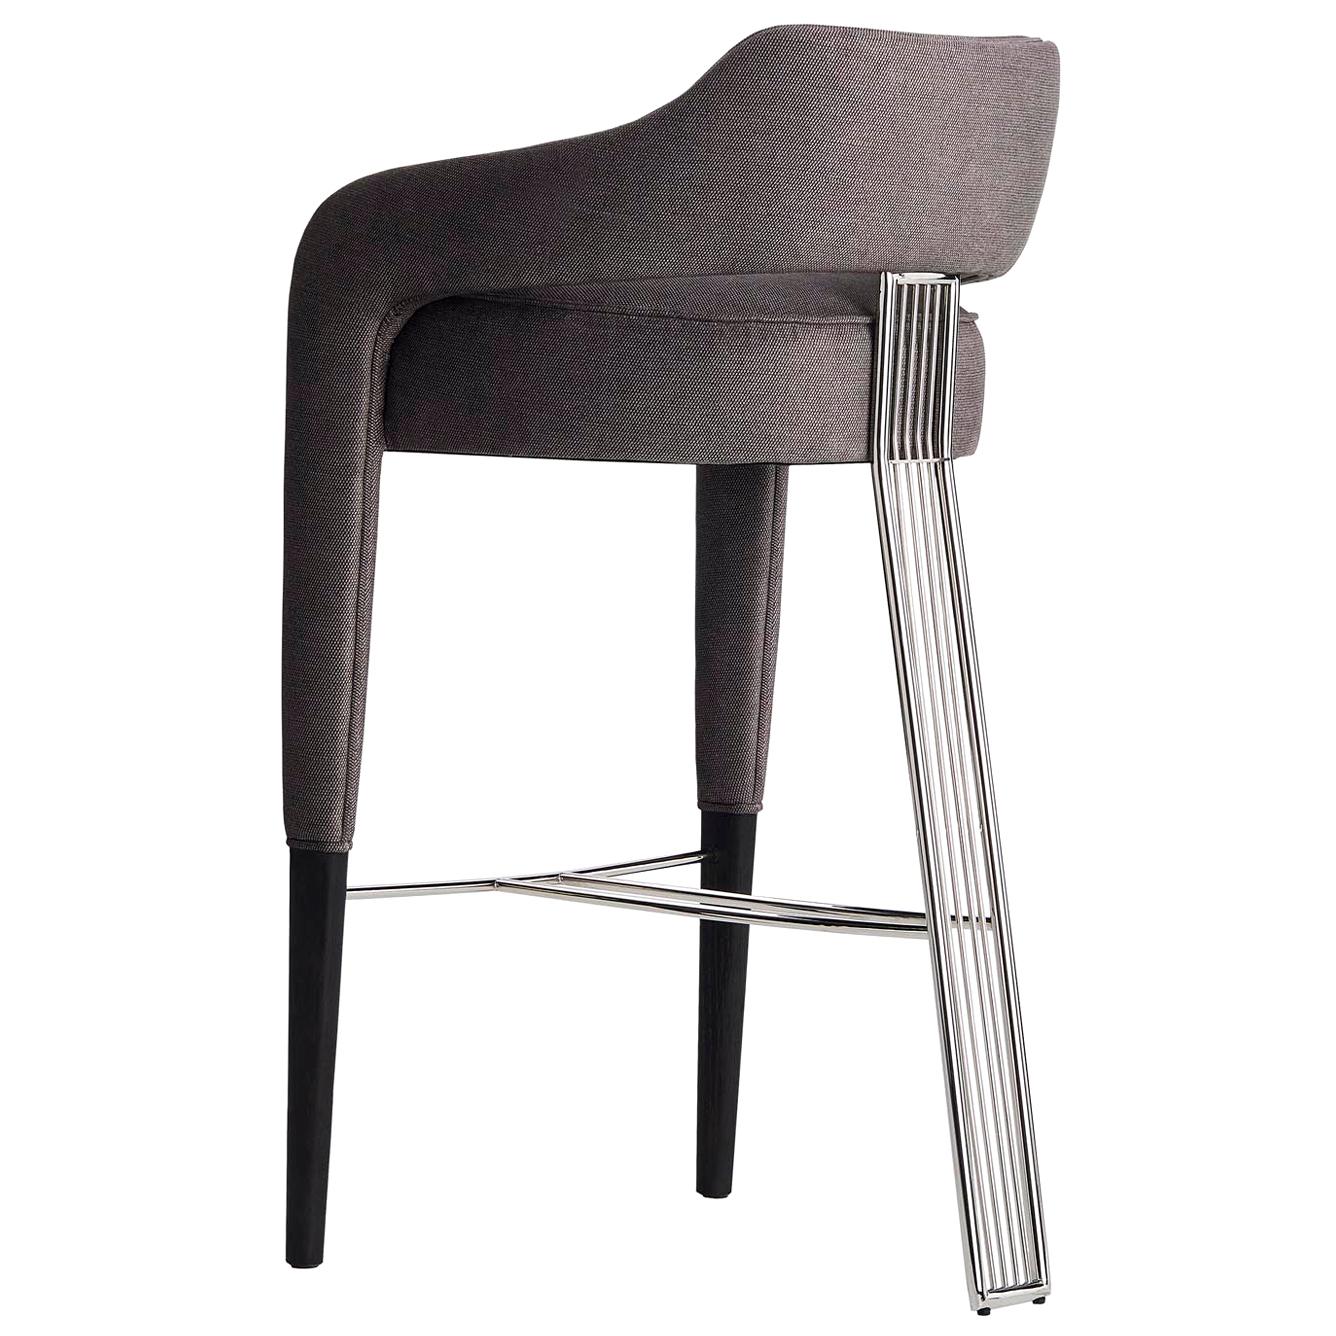 INVICTA II Bar Stool with Stainless Steel rear leg For Sale